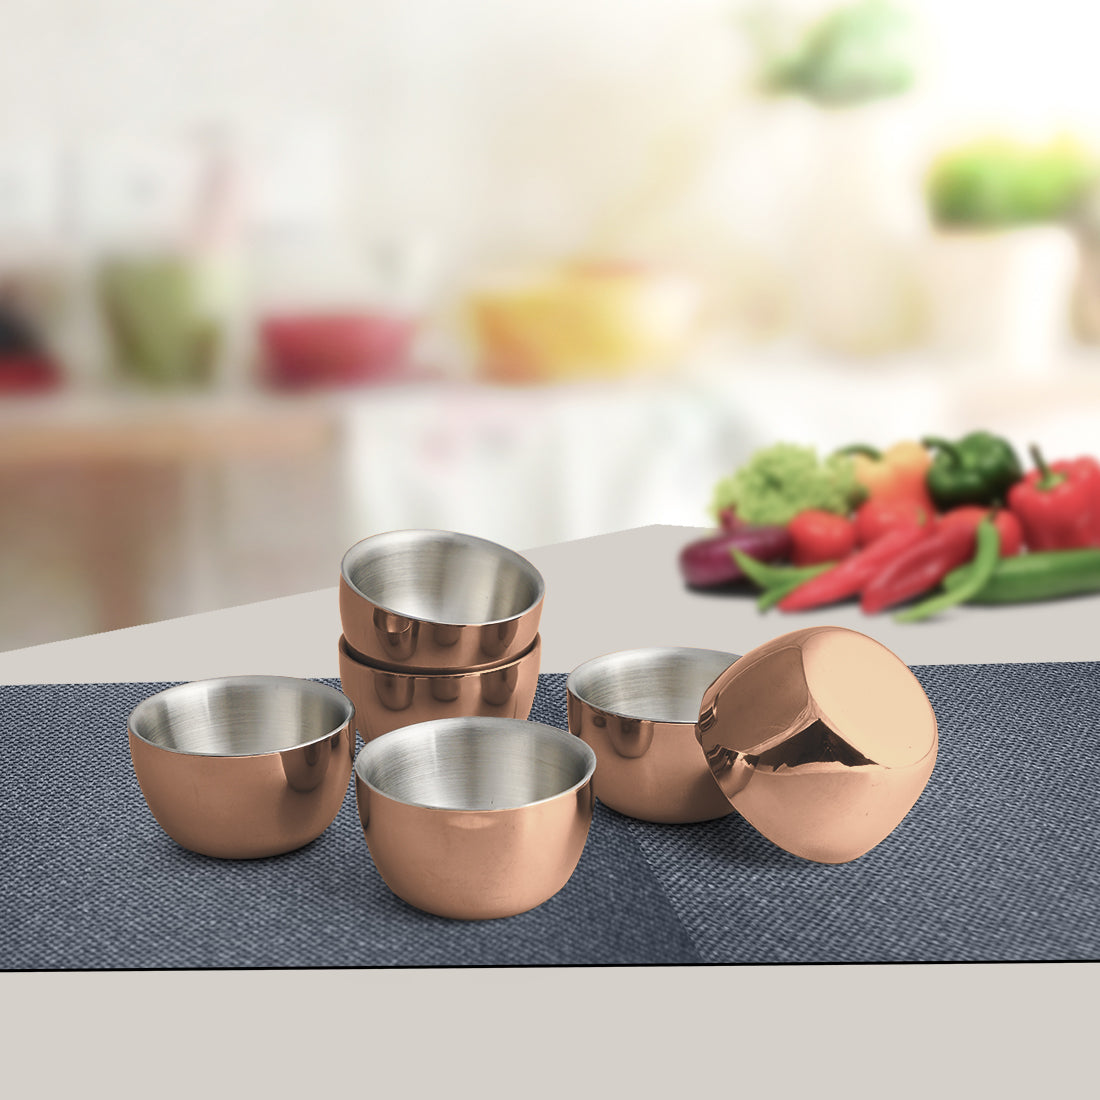 Stainless Steel 6 PCS Double Wall Bowl with  Rose Gold PVD Coating Nikki